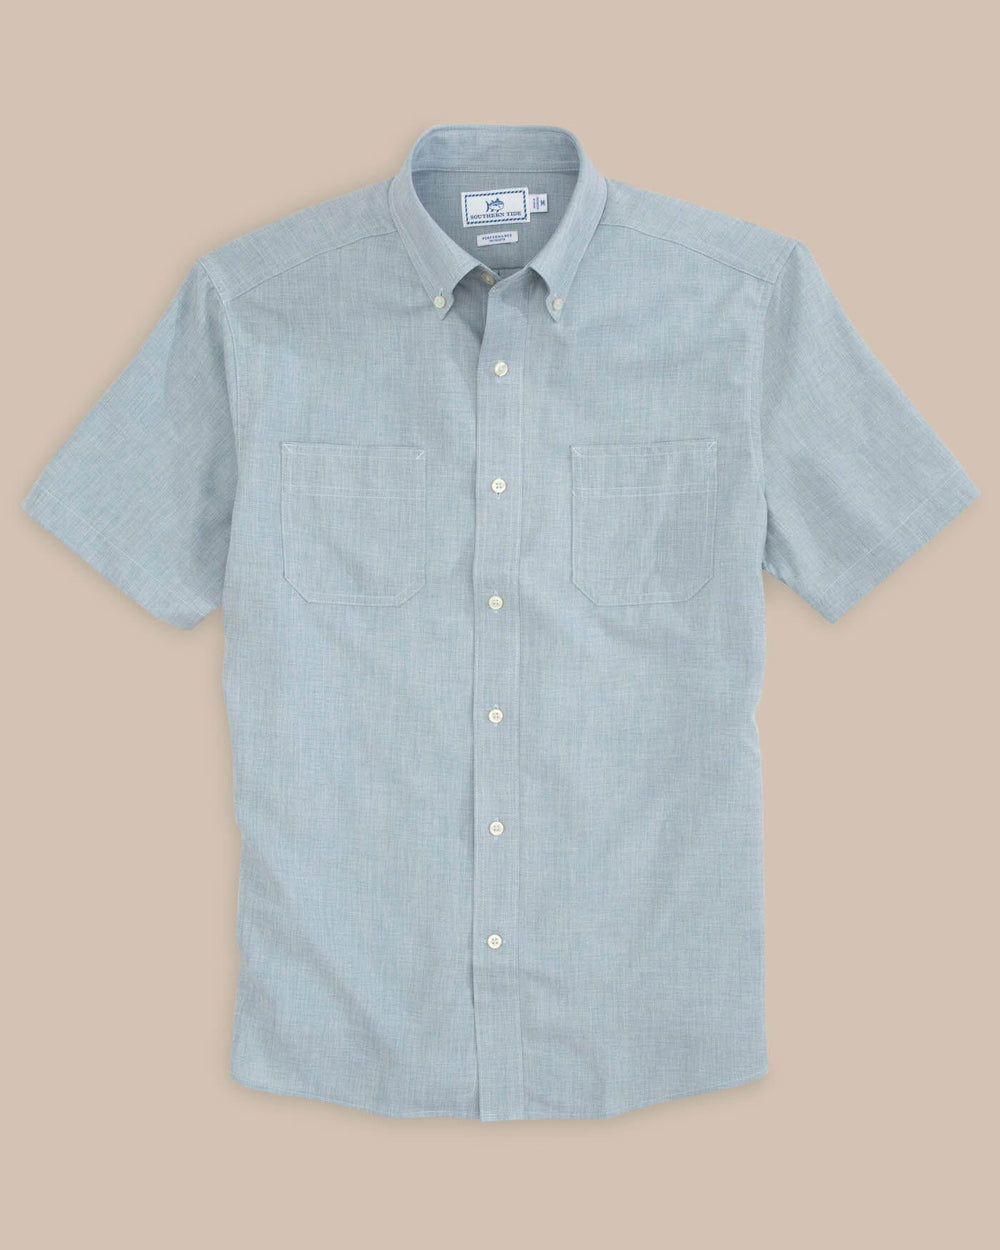 The front view of the Men's Grey Short Sleeve Dock Shirt by Southern Tide - Seagull Grey